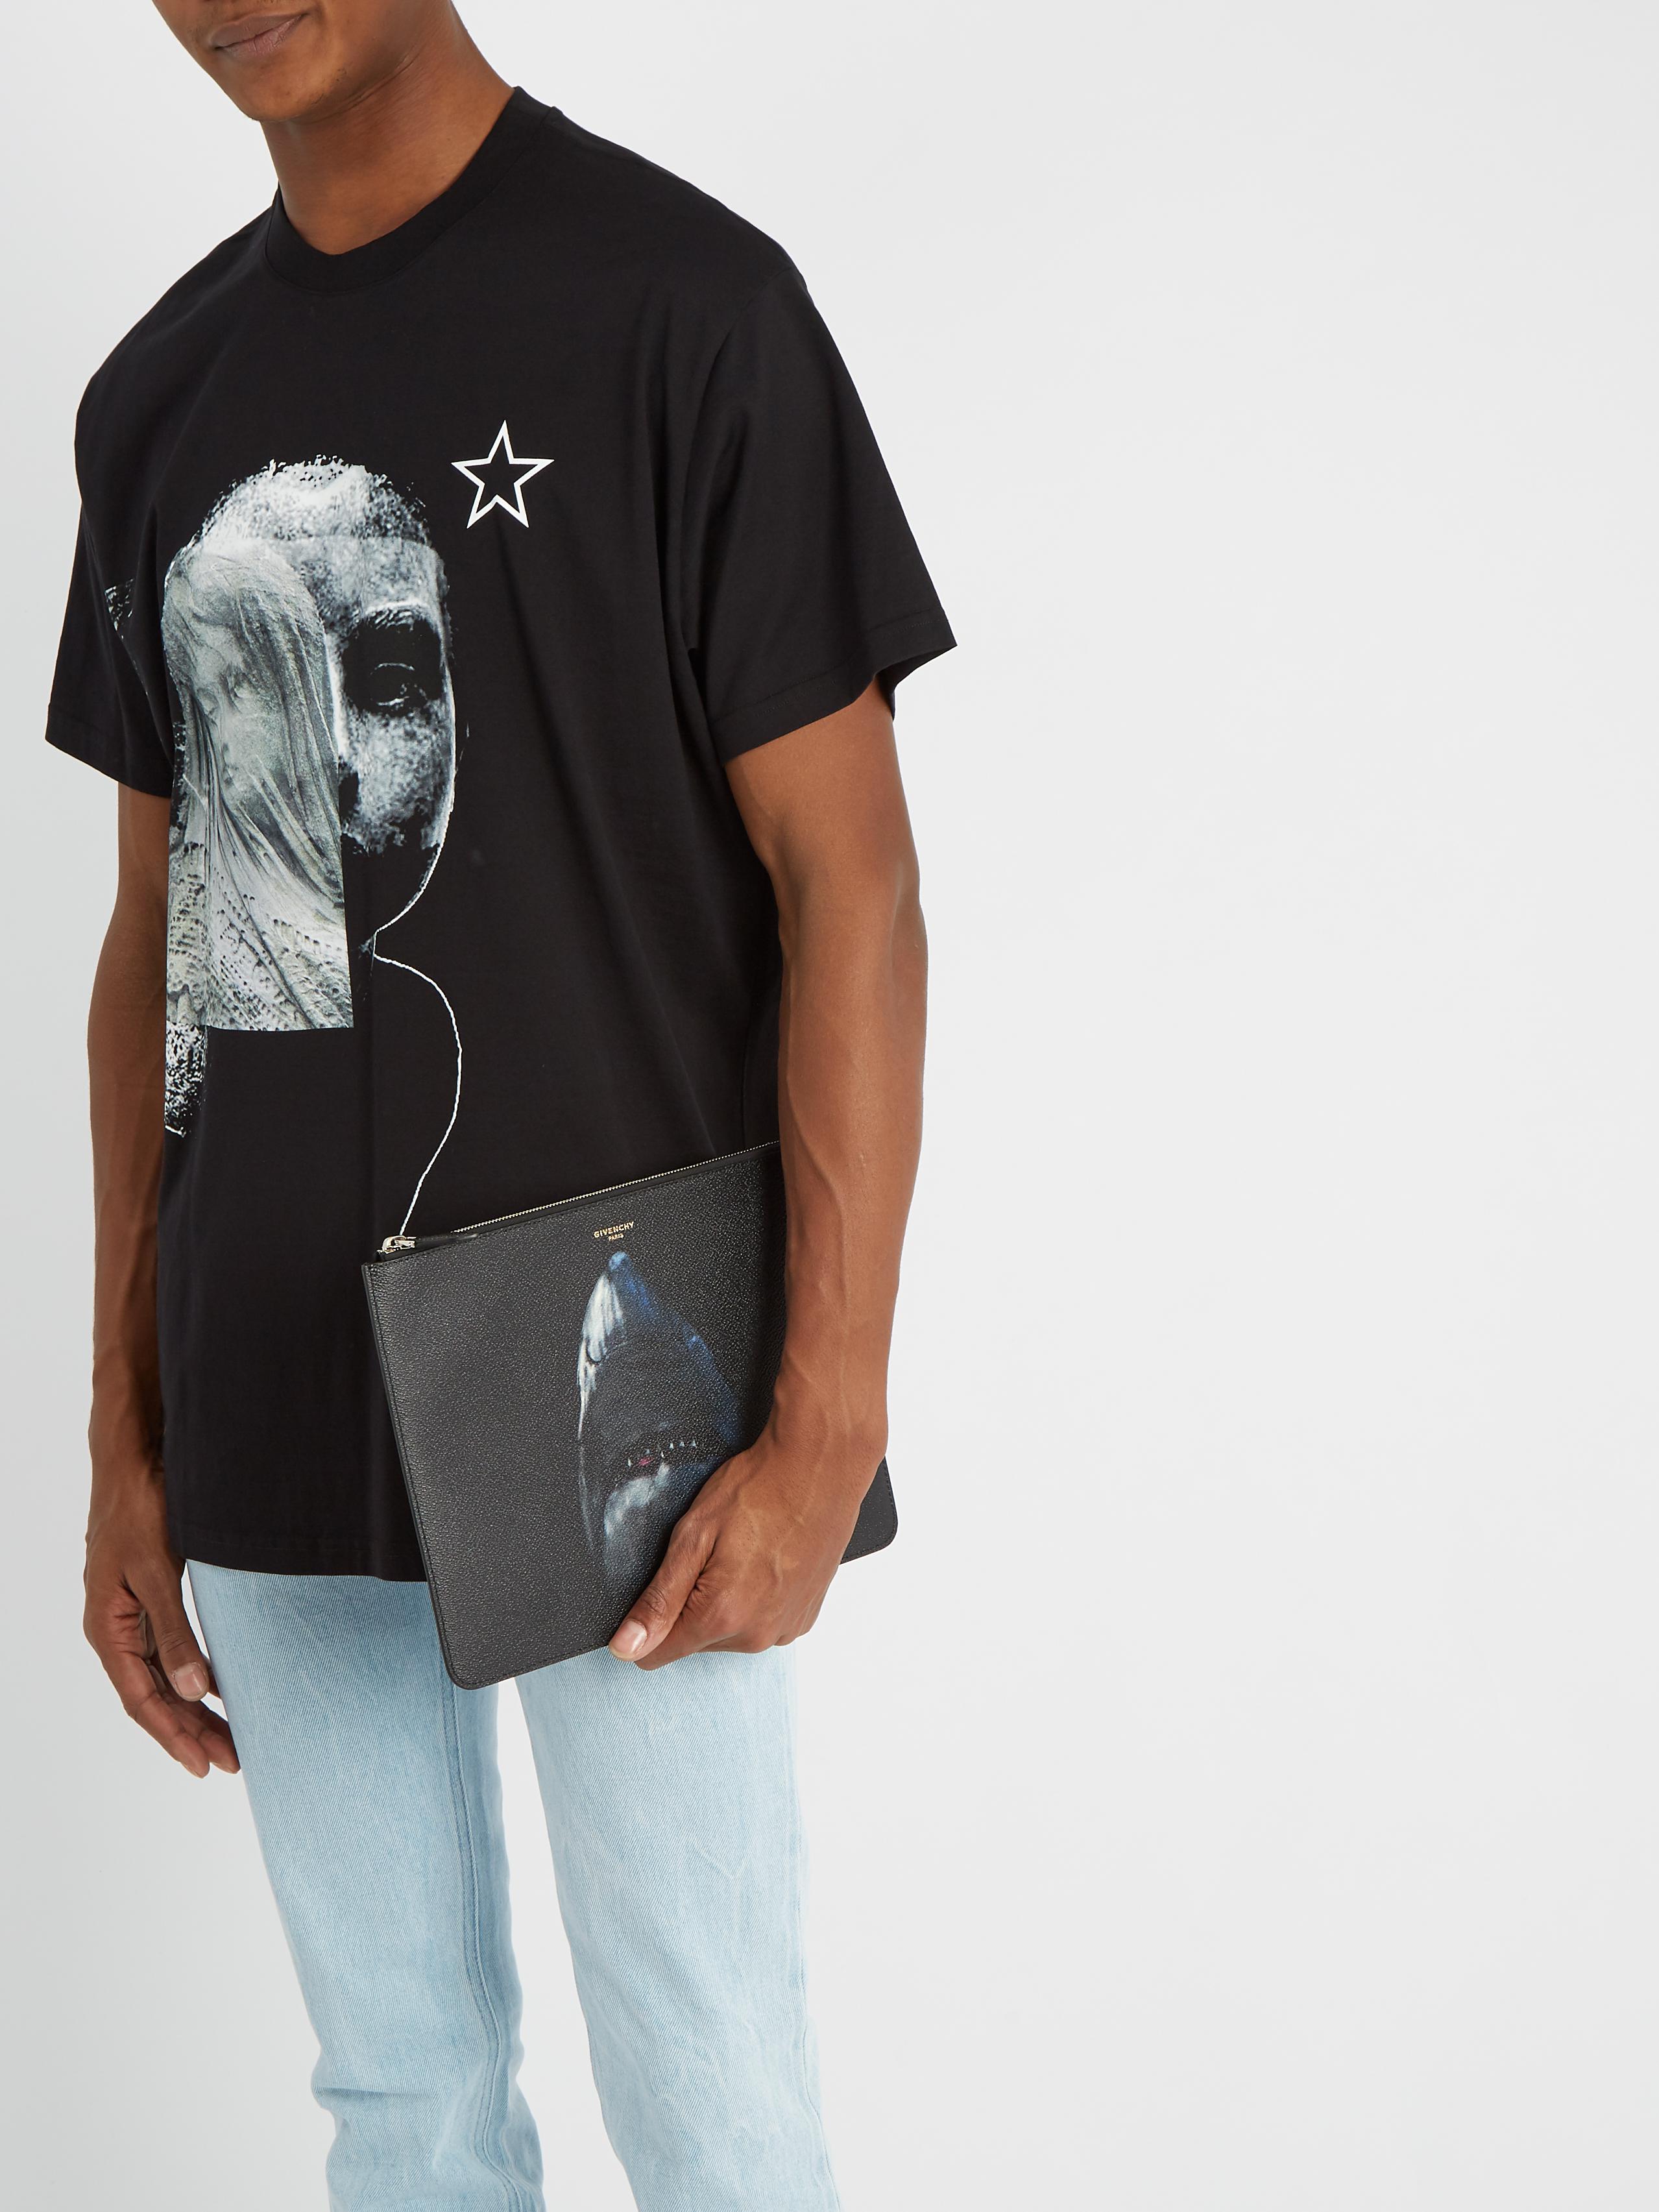 givenchy shark pouch